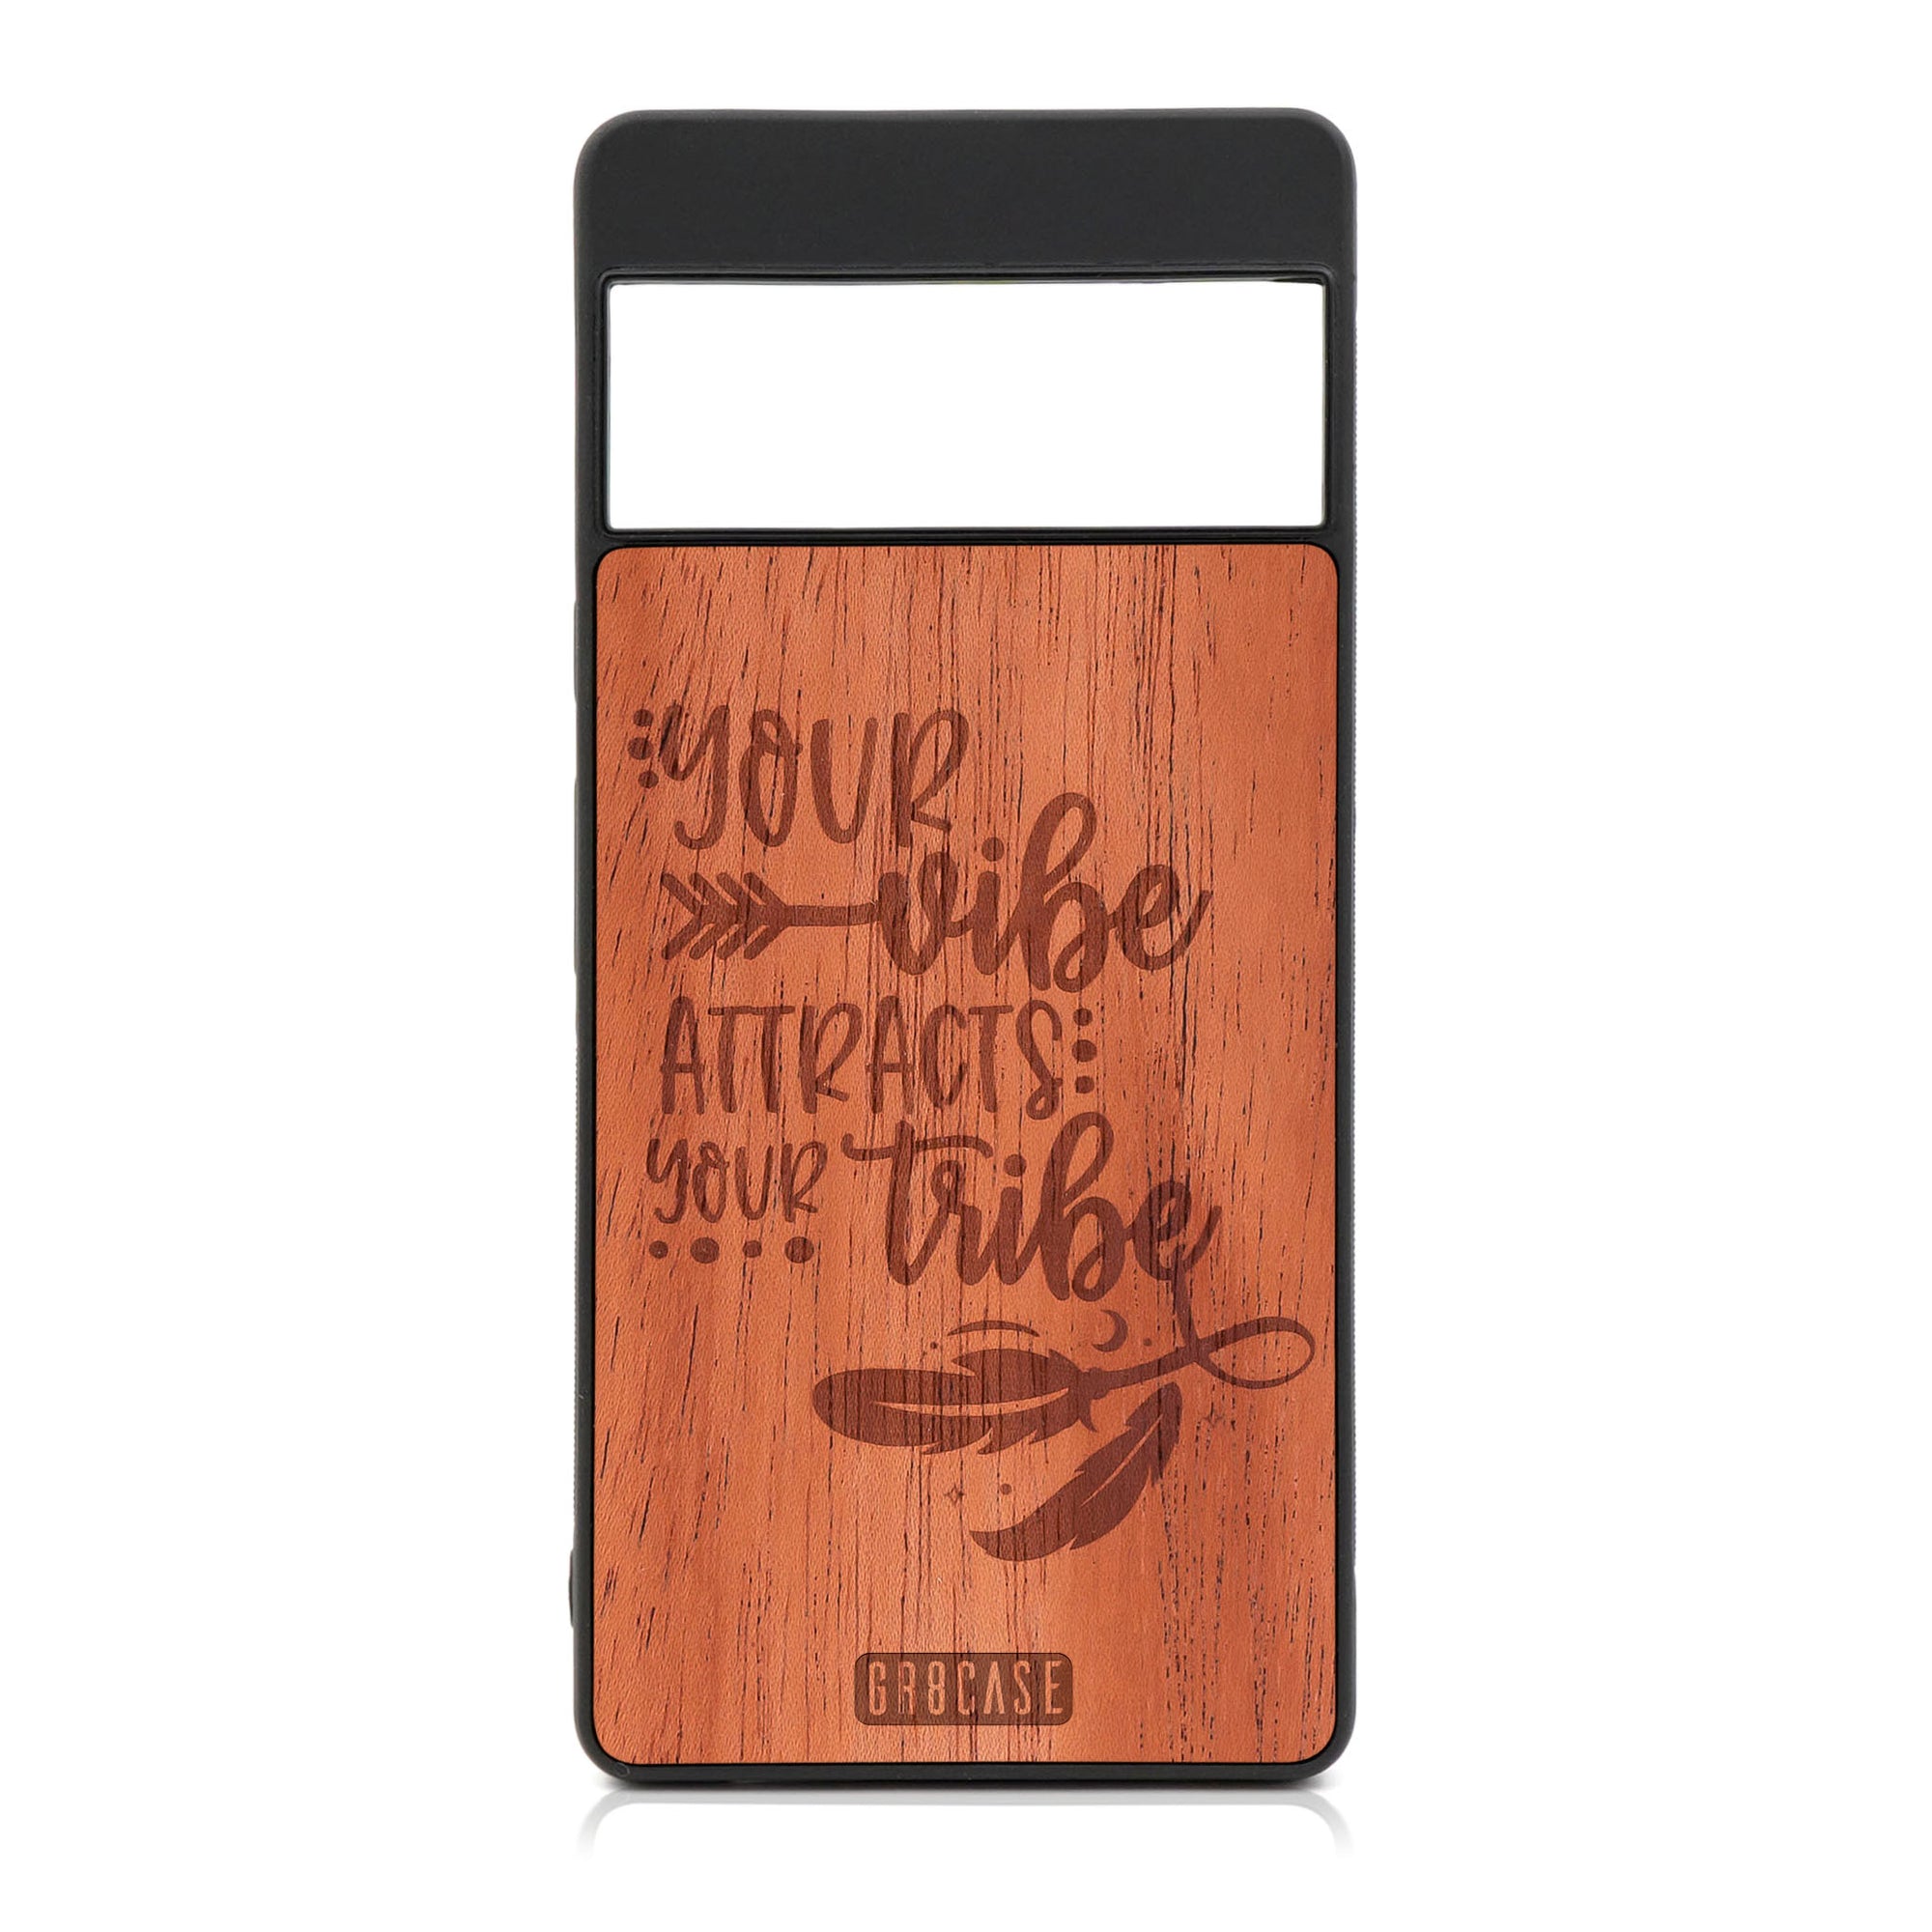 Your Vibe Attracts Your Tribe Design Wood Case For Google Pixel 6